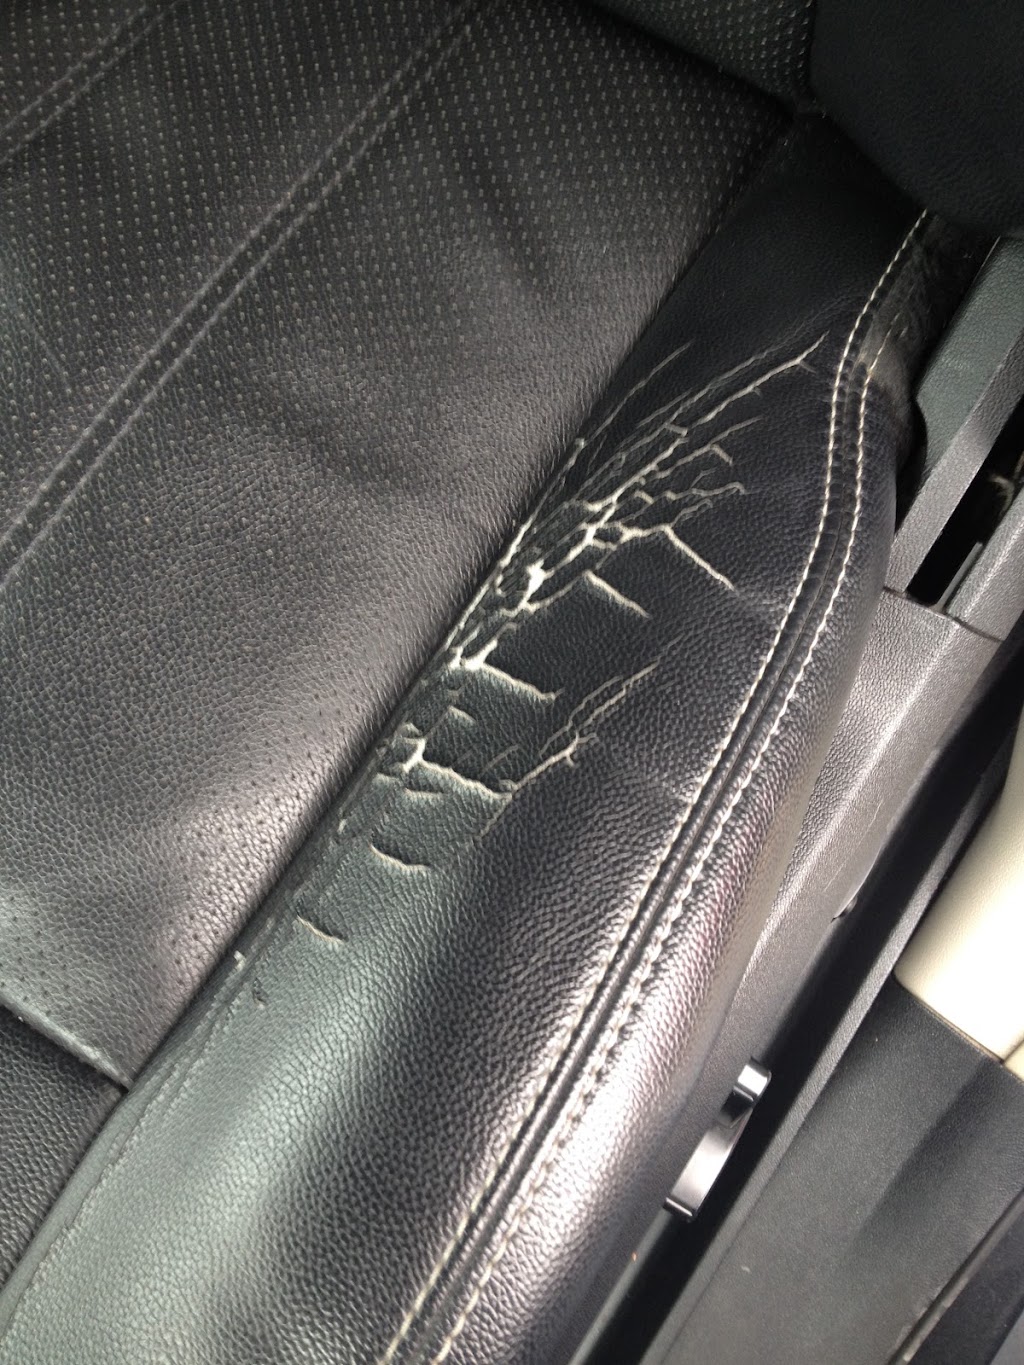 Leather Repair NYC | 161-25 29th Ave, Flushing, NY 11358 | Phone: (917) 776-4304